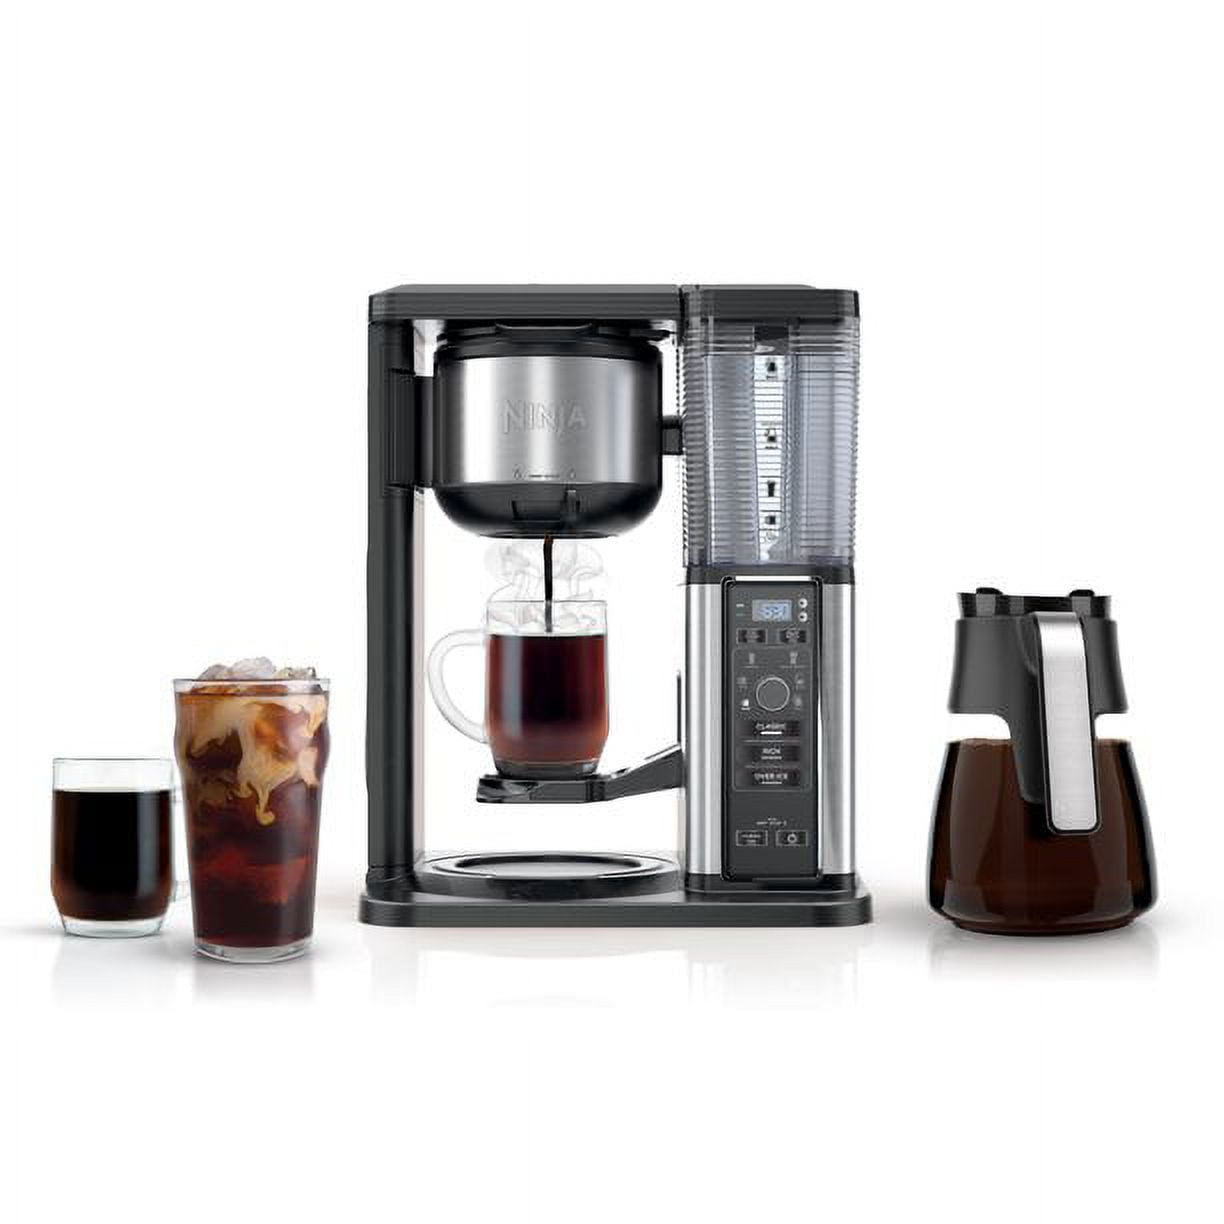 Ninja's carafe/single-serve coffee maker with cold brew and